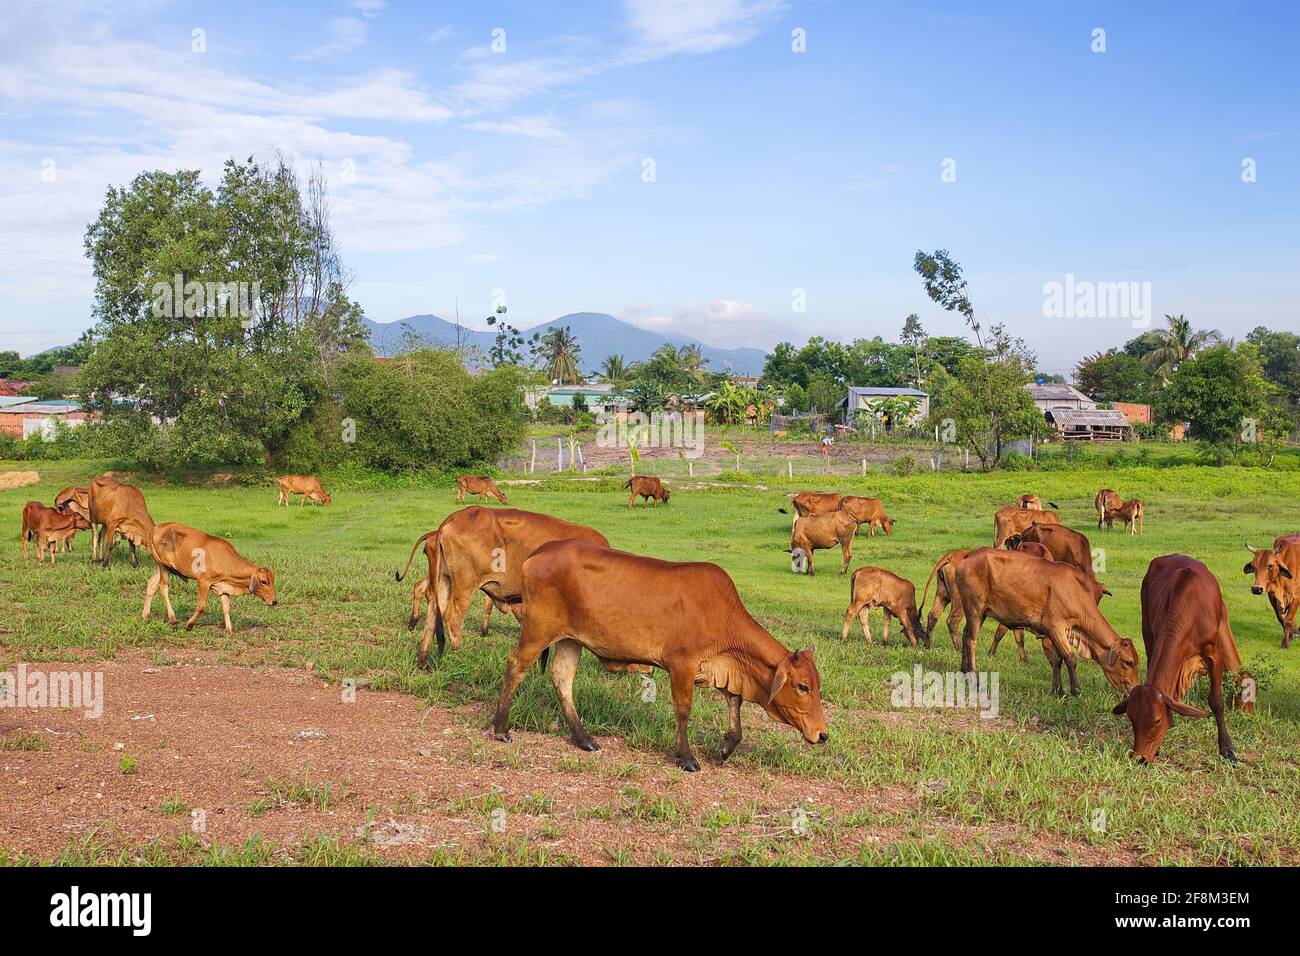 Herd of cows grazing on a rural field Stock Photo